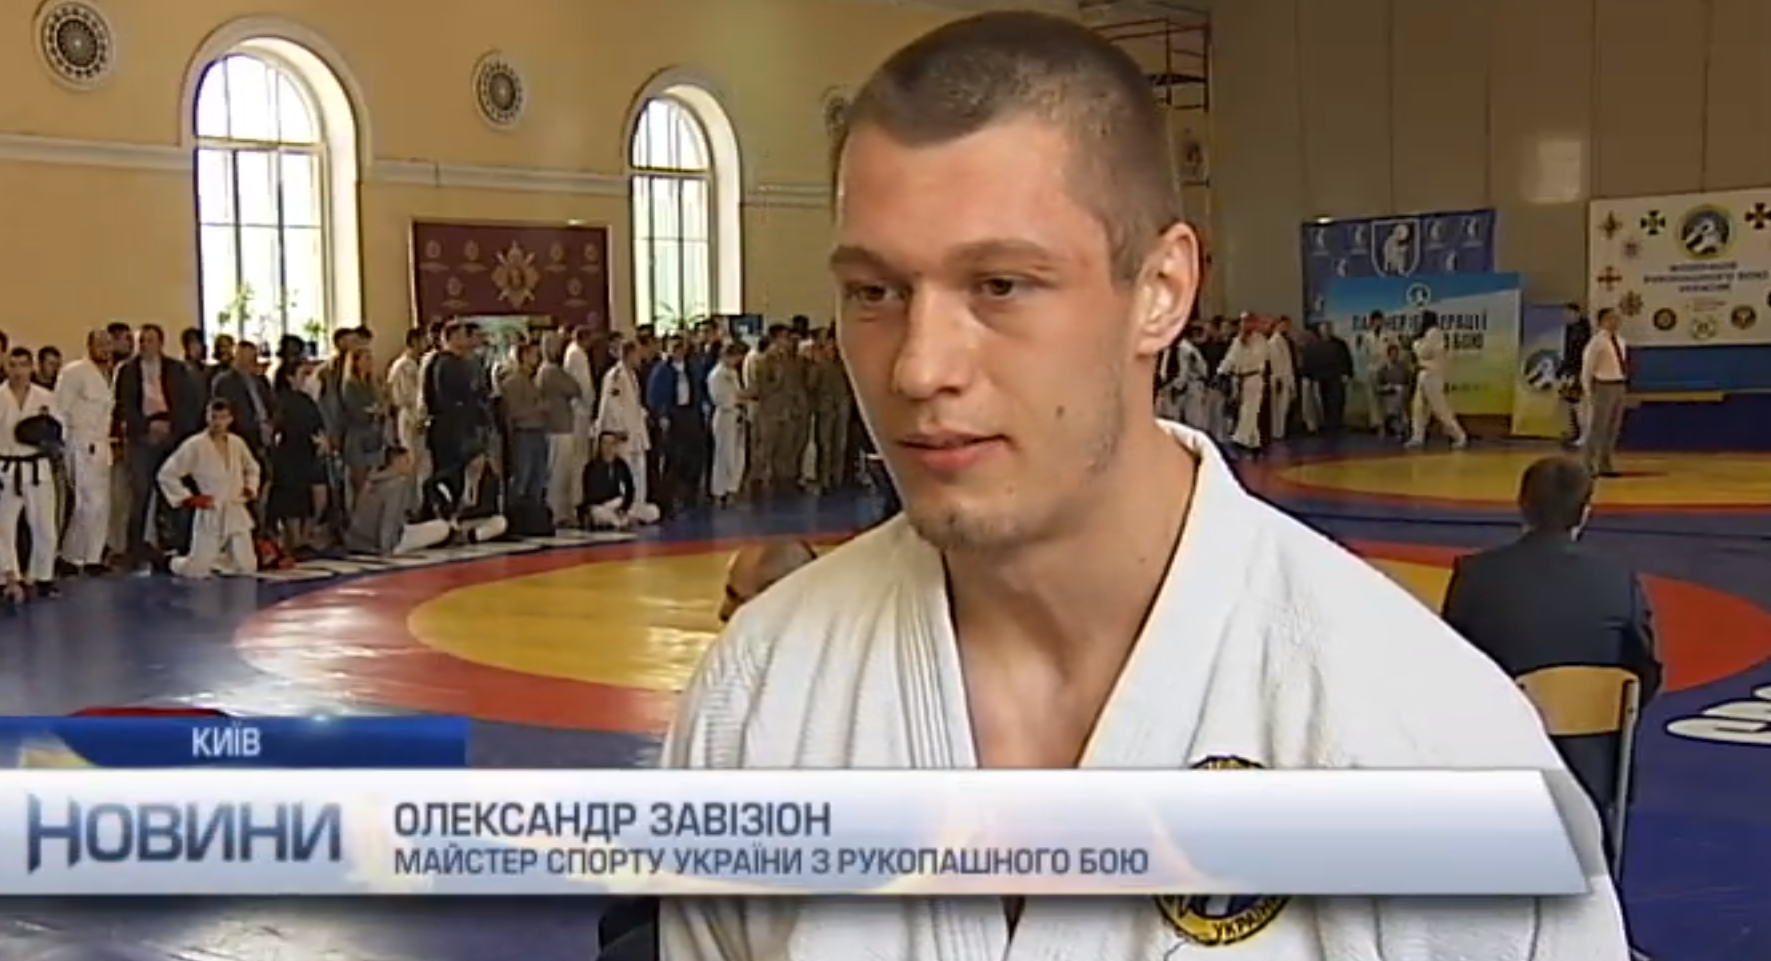 OLEKSANDR ZAVIZION BECAME THE BEST AT THE CHAMPIONSHIP OF UKRAINE IN HAND TO HAND COMBAT